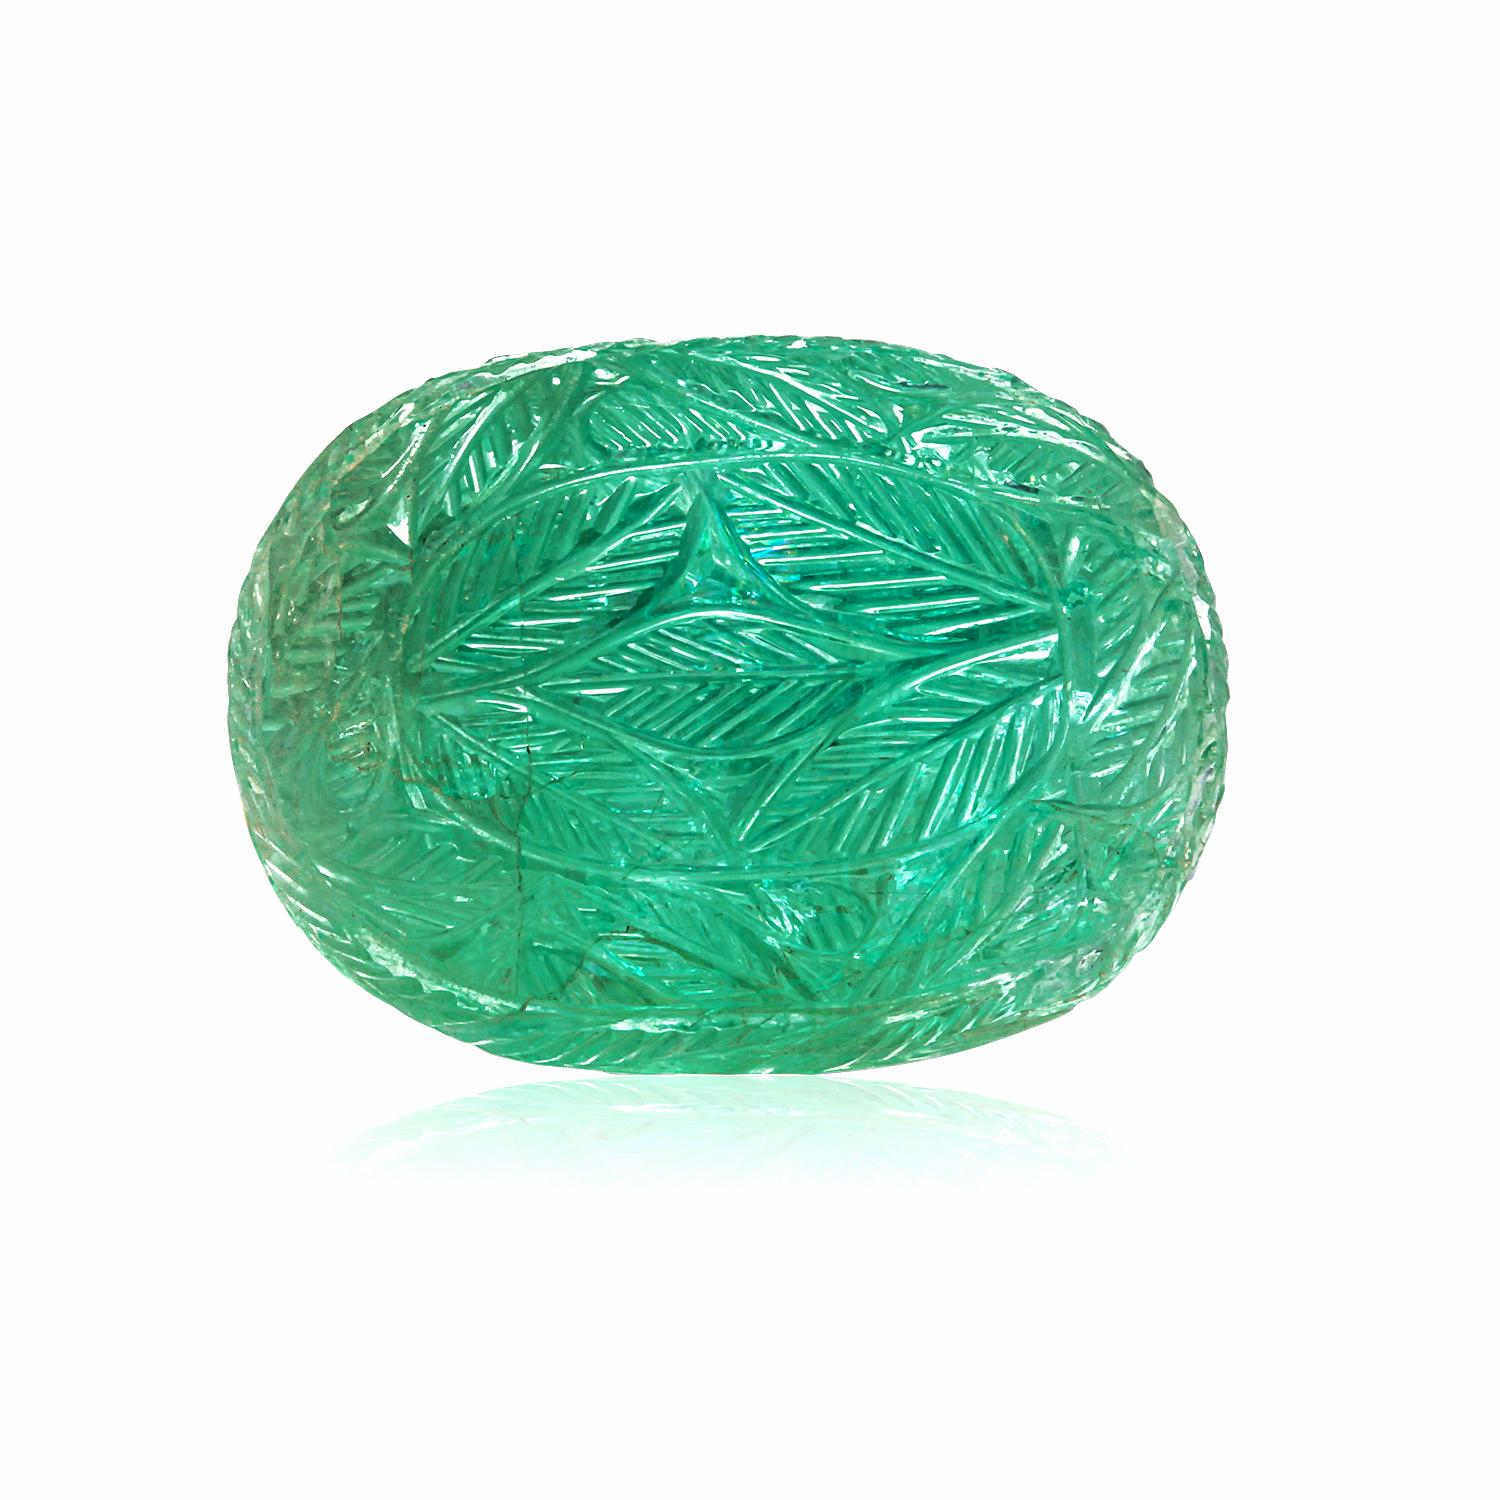 Oval Cut GIA Certificated Oval Carved Double Sided Cabochon Emerald Weighing 53.64 Carats For Sale